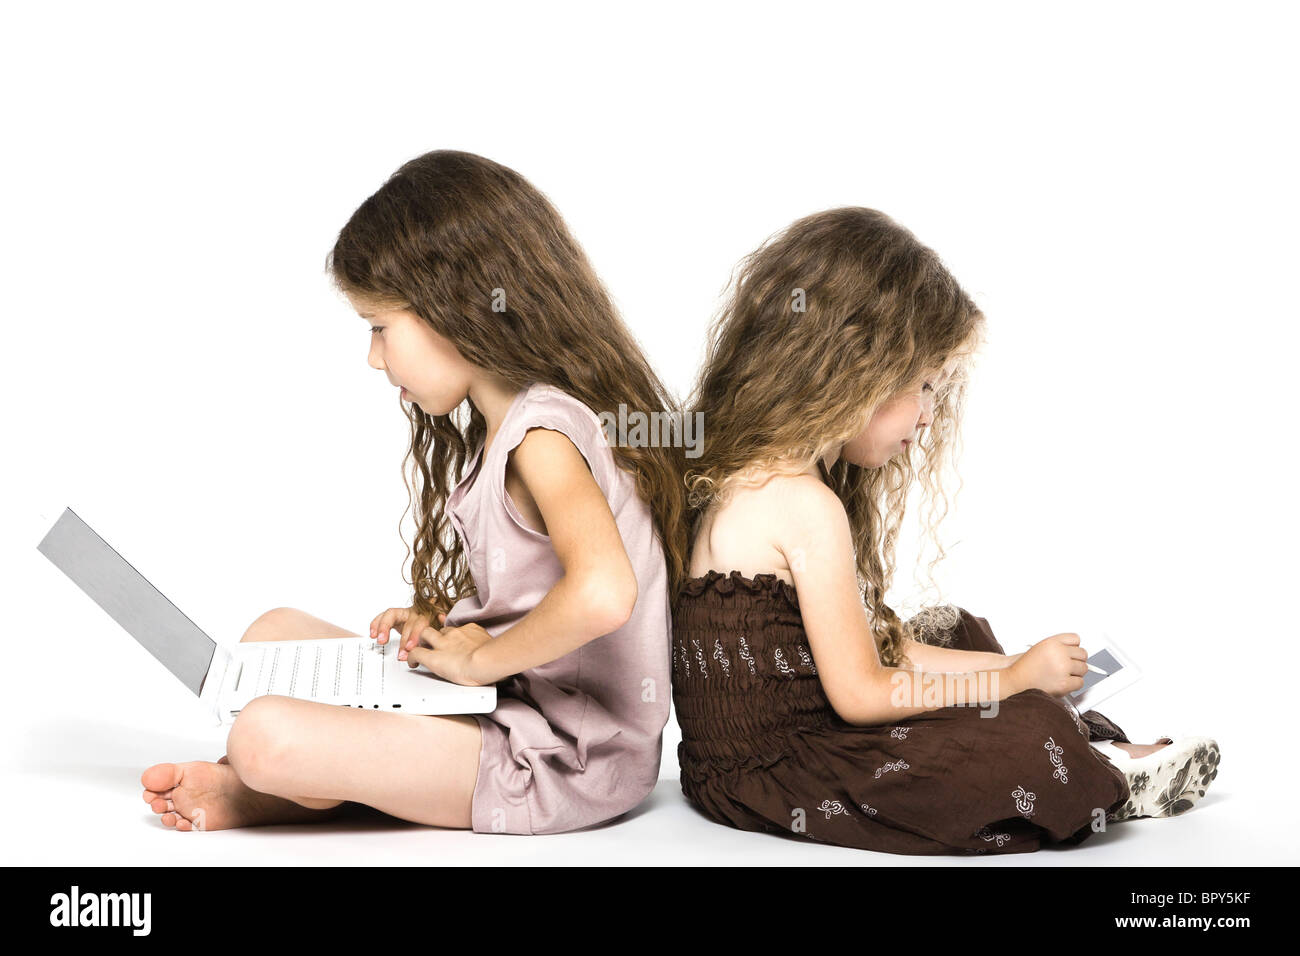 caucasian little girls playing game console back to back isolated studio on white background Stock Photo